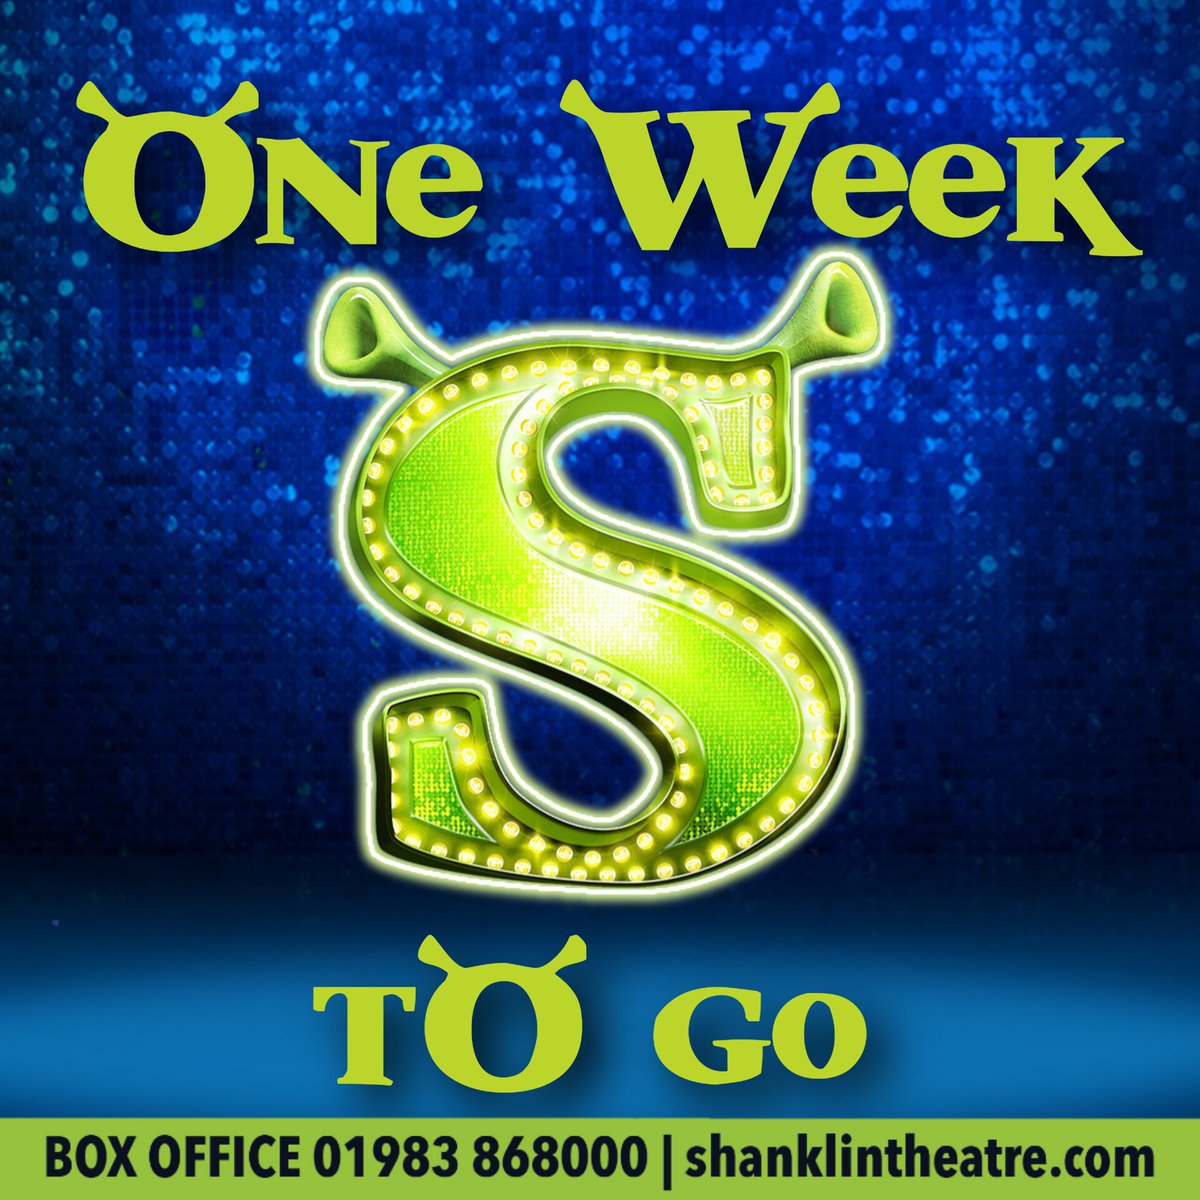 💚💚💚💚💚💚💚💚💚💚💚 SHREK THE MUSICAL 25th to 29th October SHANKLIN THEATRE shanklintheatre.com 💚💚💚💚💚💚💚💚💚💚💚